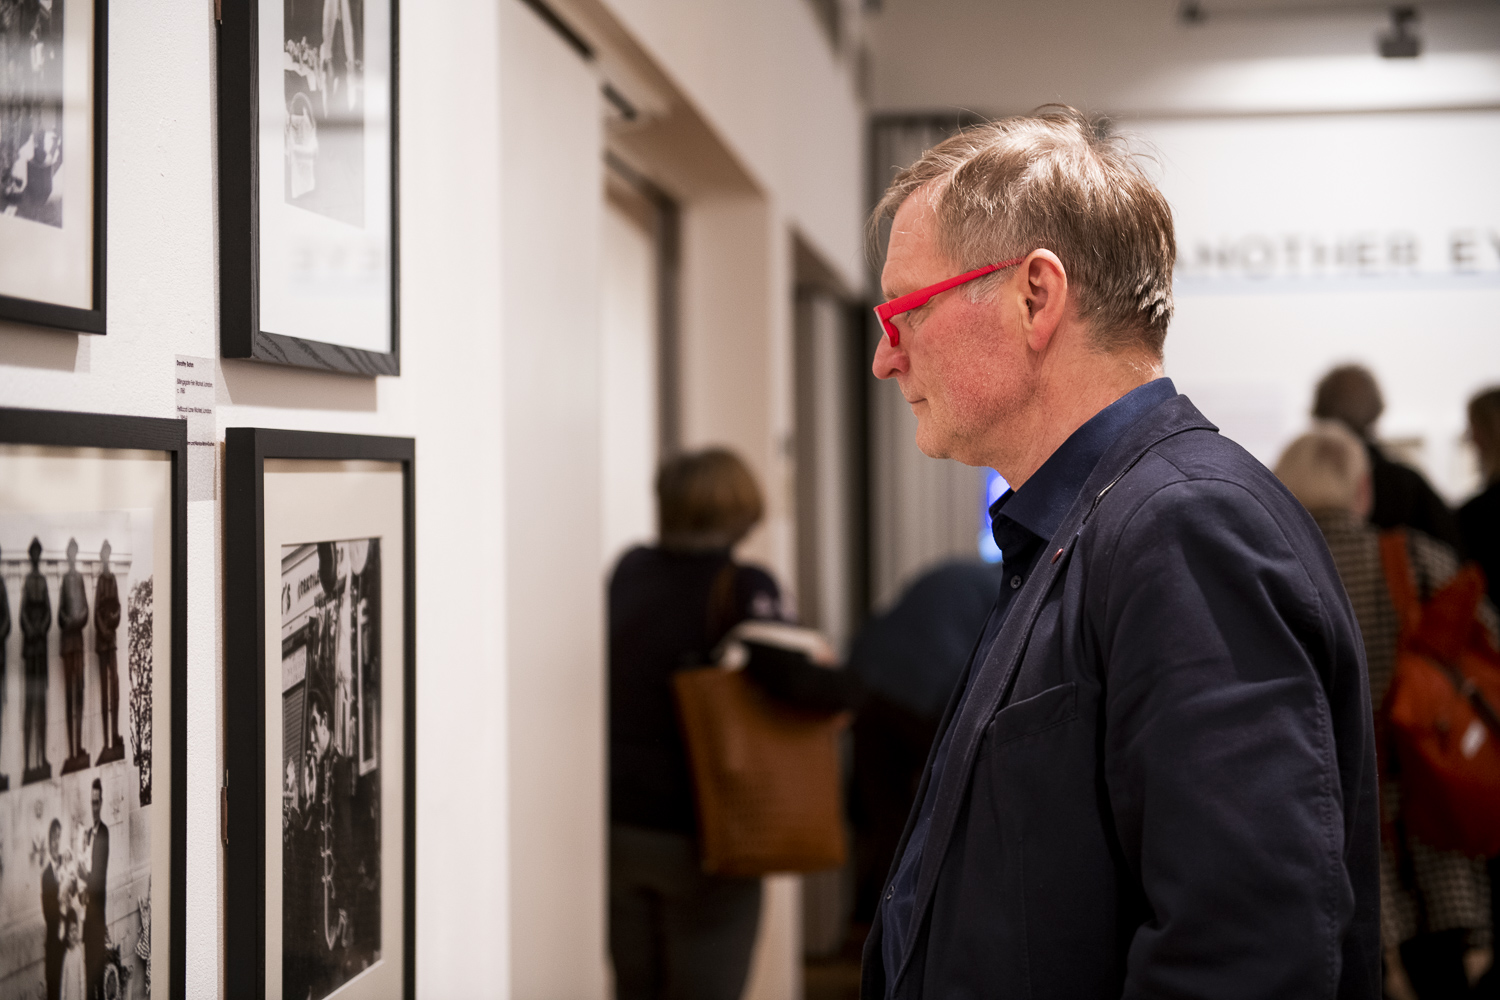 Person with red glasses looks at framed photographs on the gallery wall 